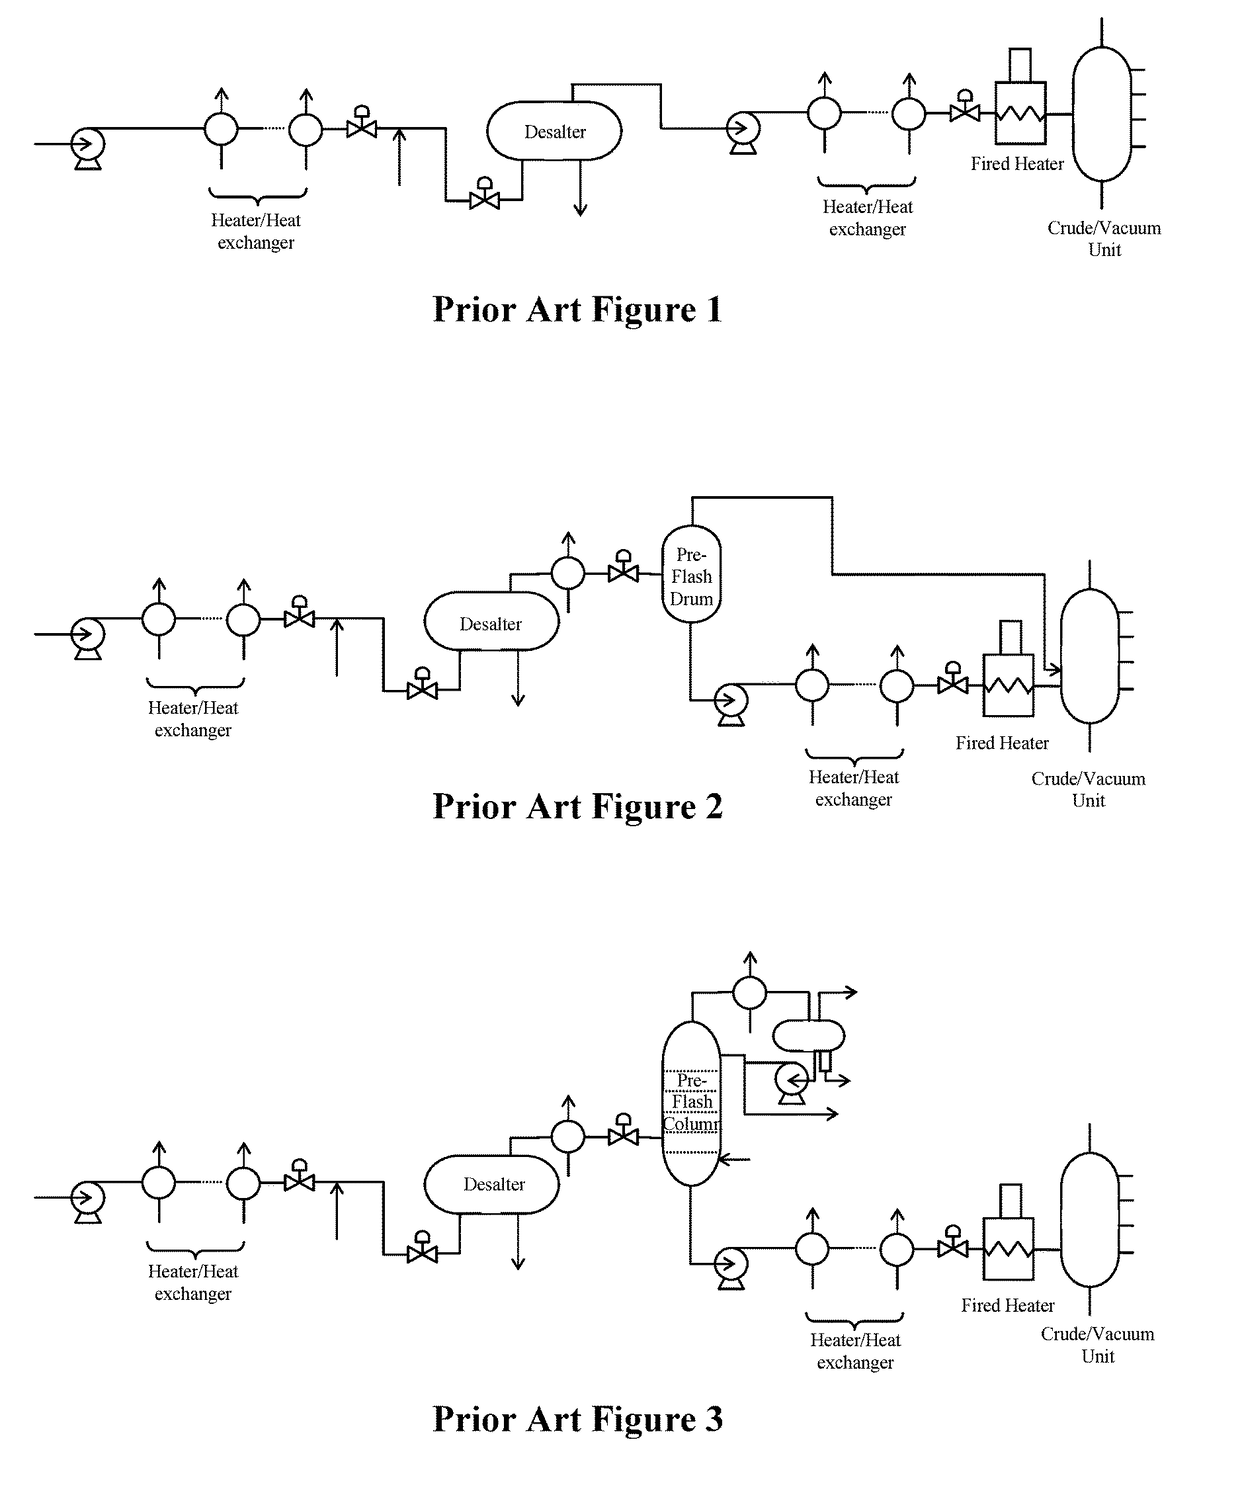 Multiple preflash and exchanger (MPEX) network system for crude and vacuum units